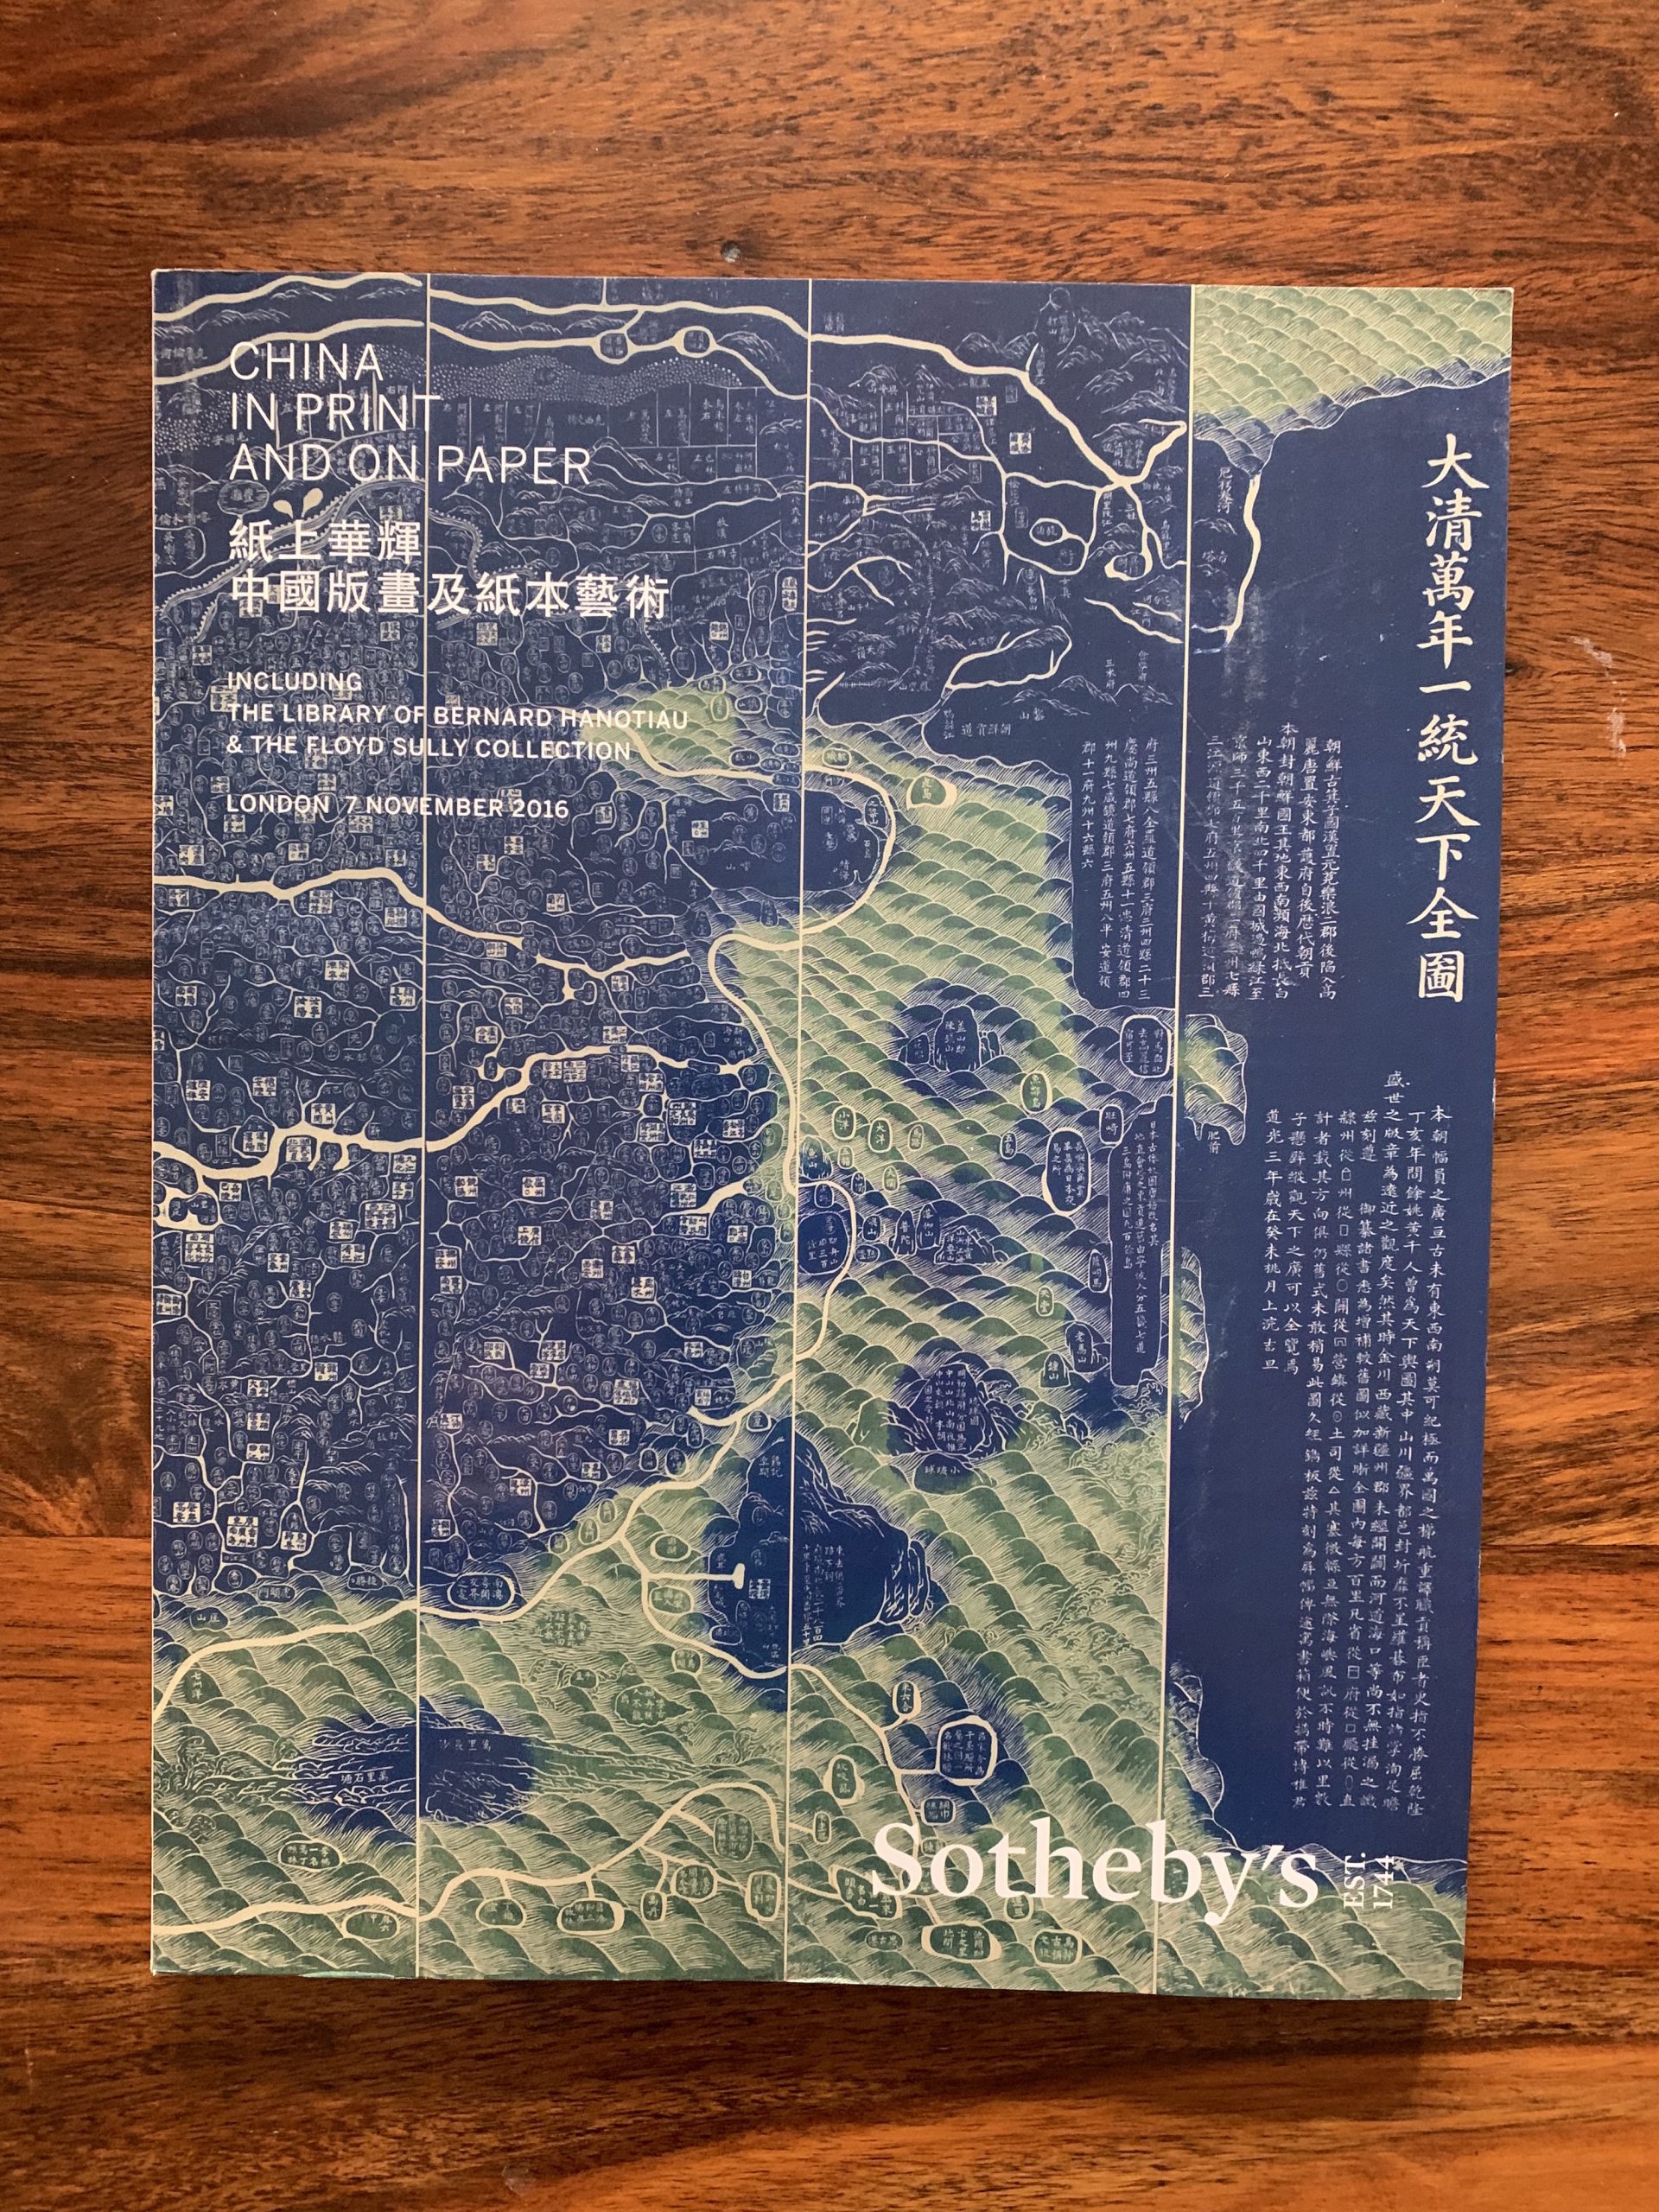 Sotheby’s. China in Print and on Paper.